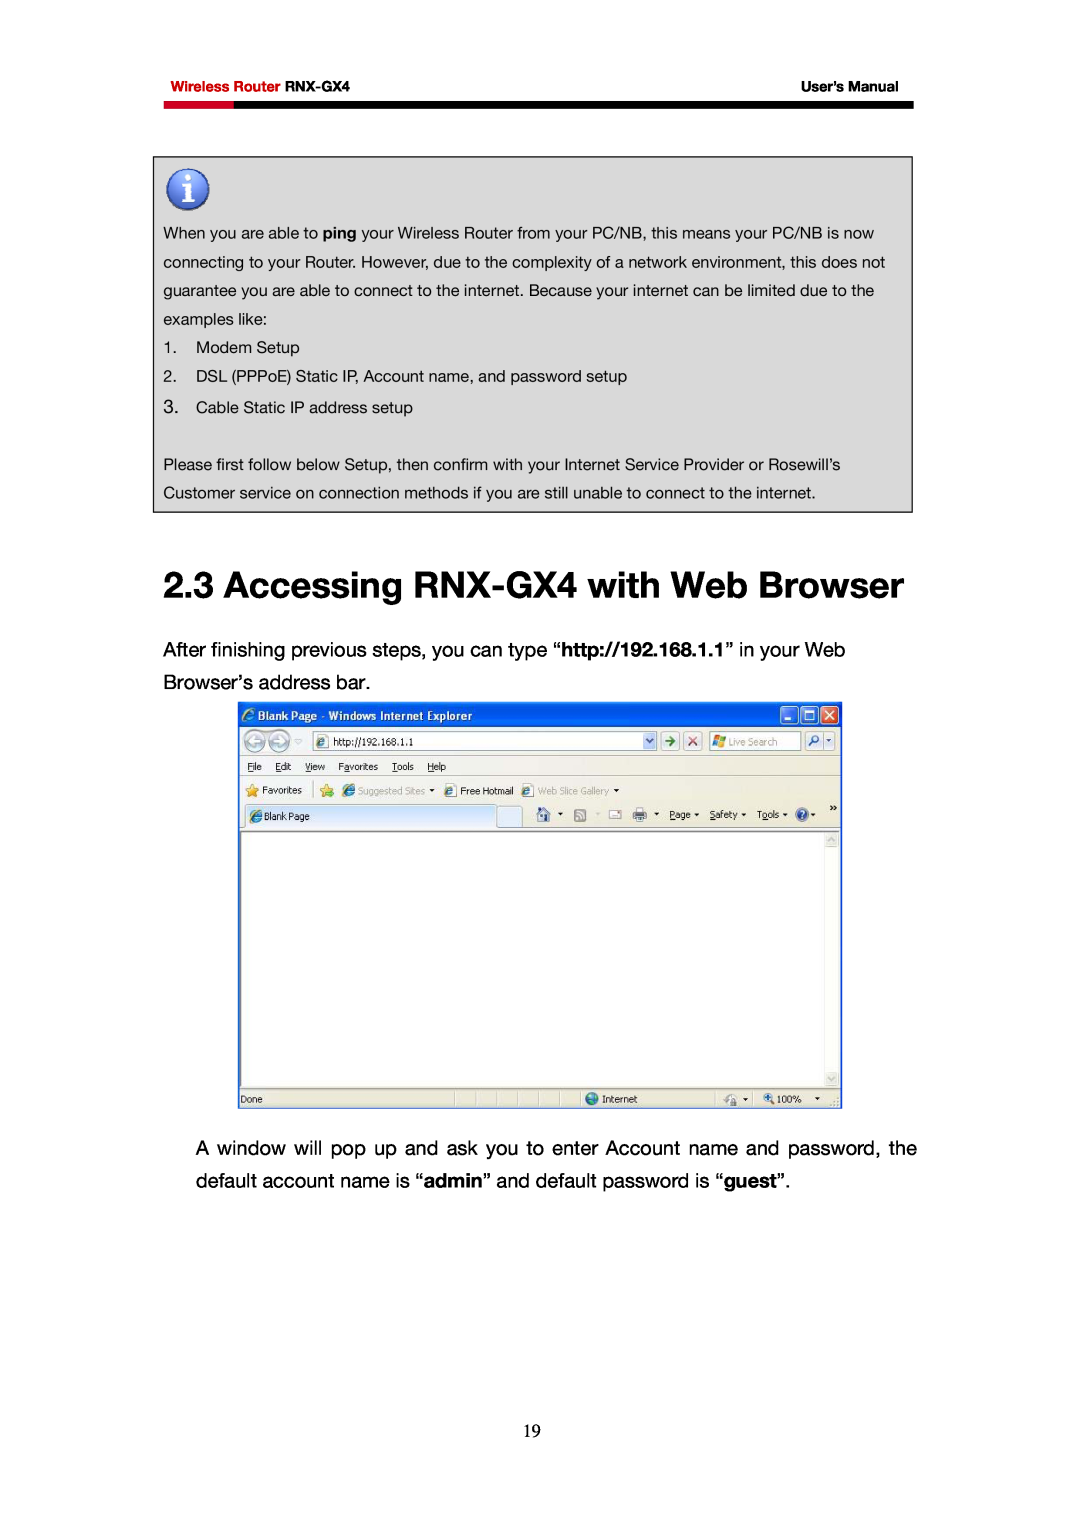 Rosewill user manual Accessing RNX-GX4 with Web Browser 